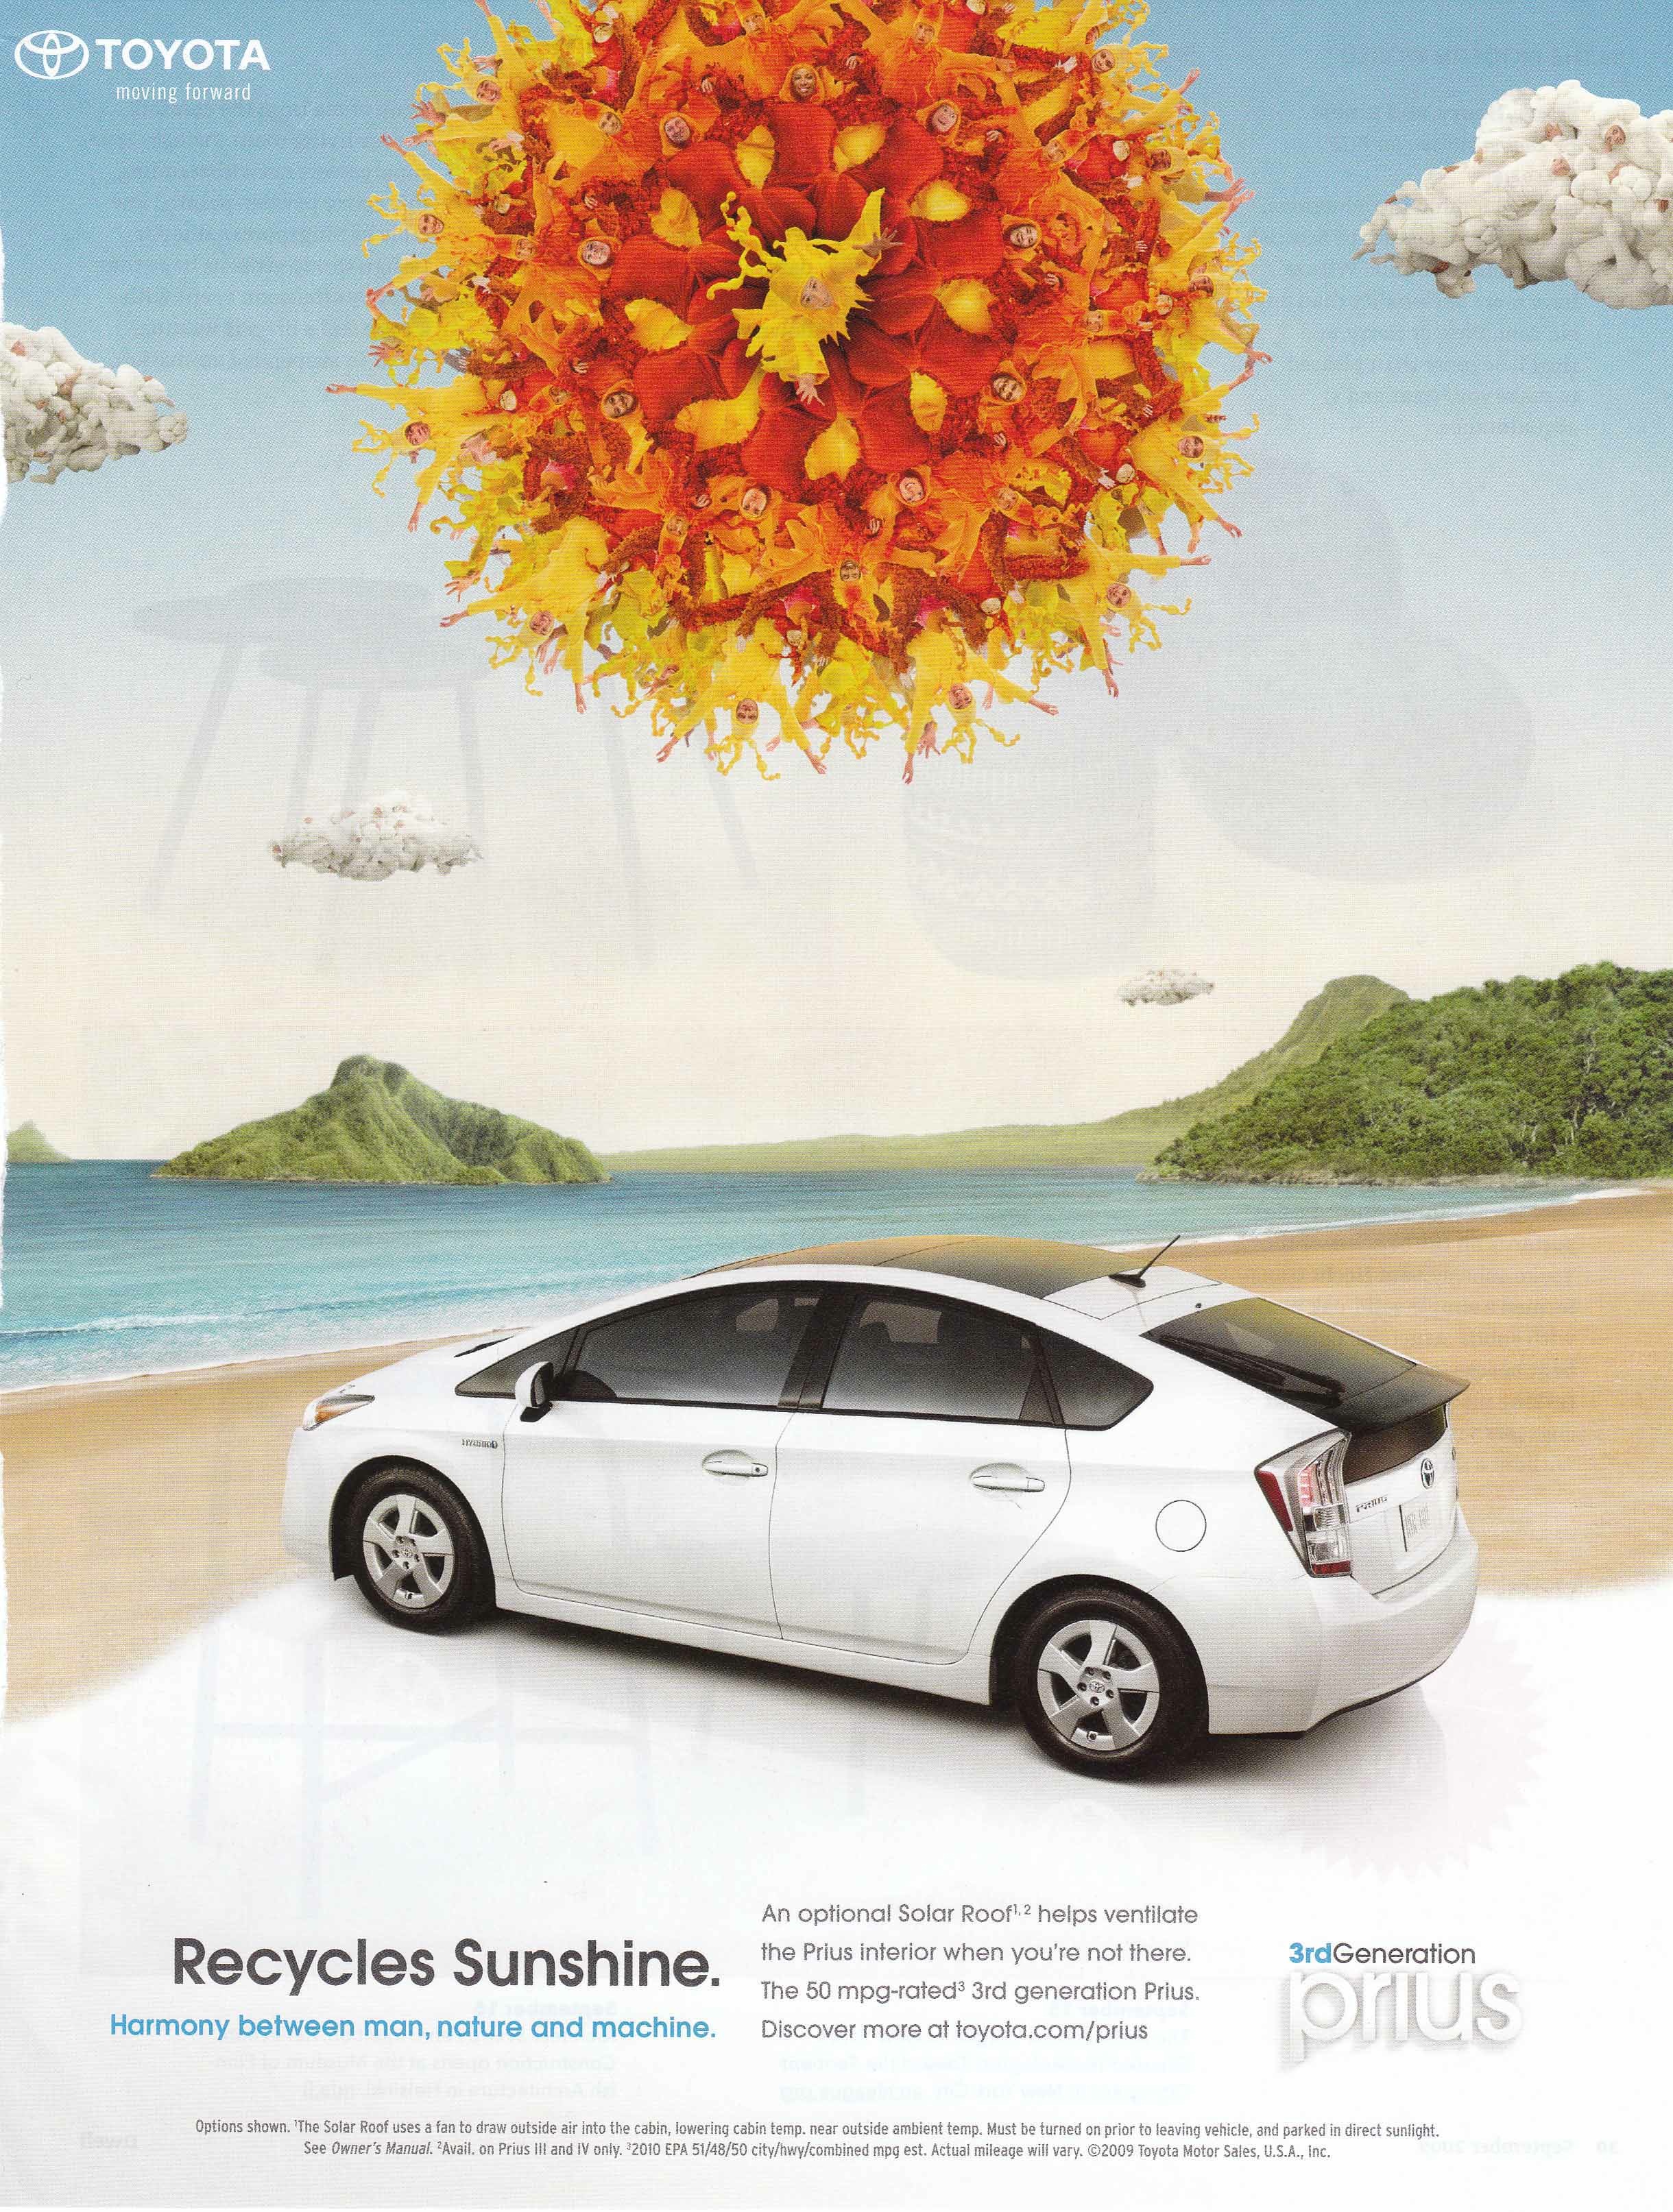 toyota advertising campaign #4